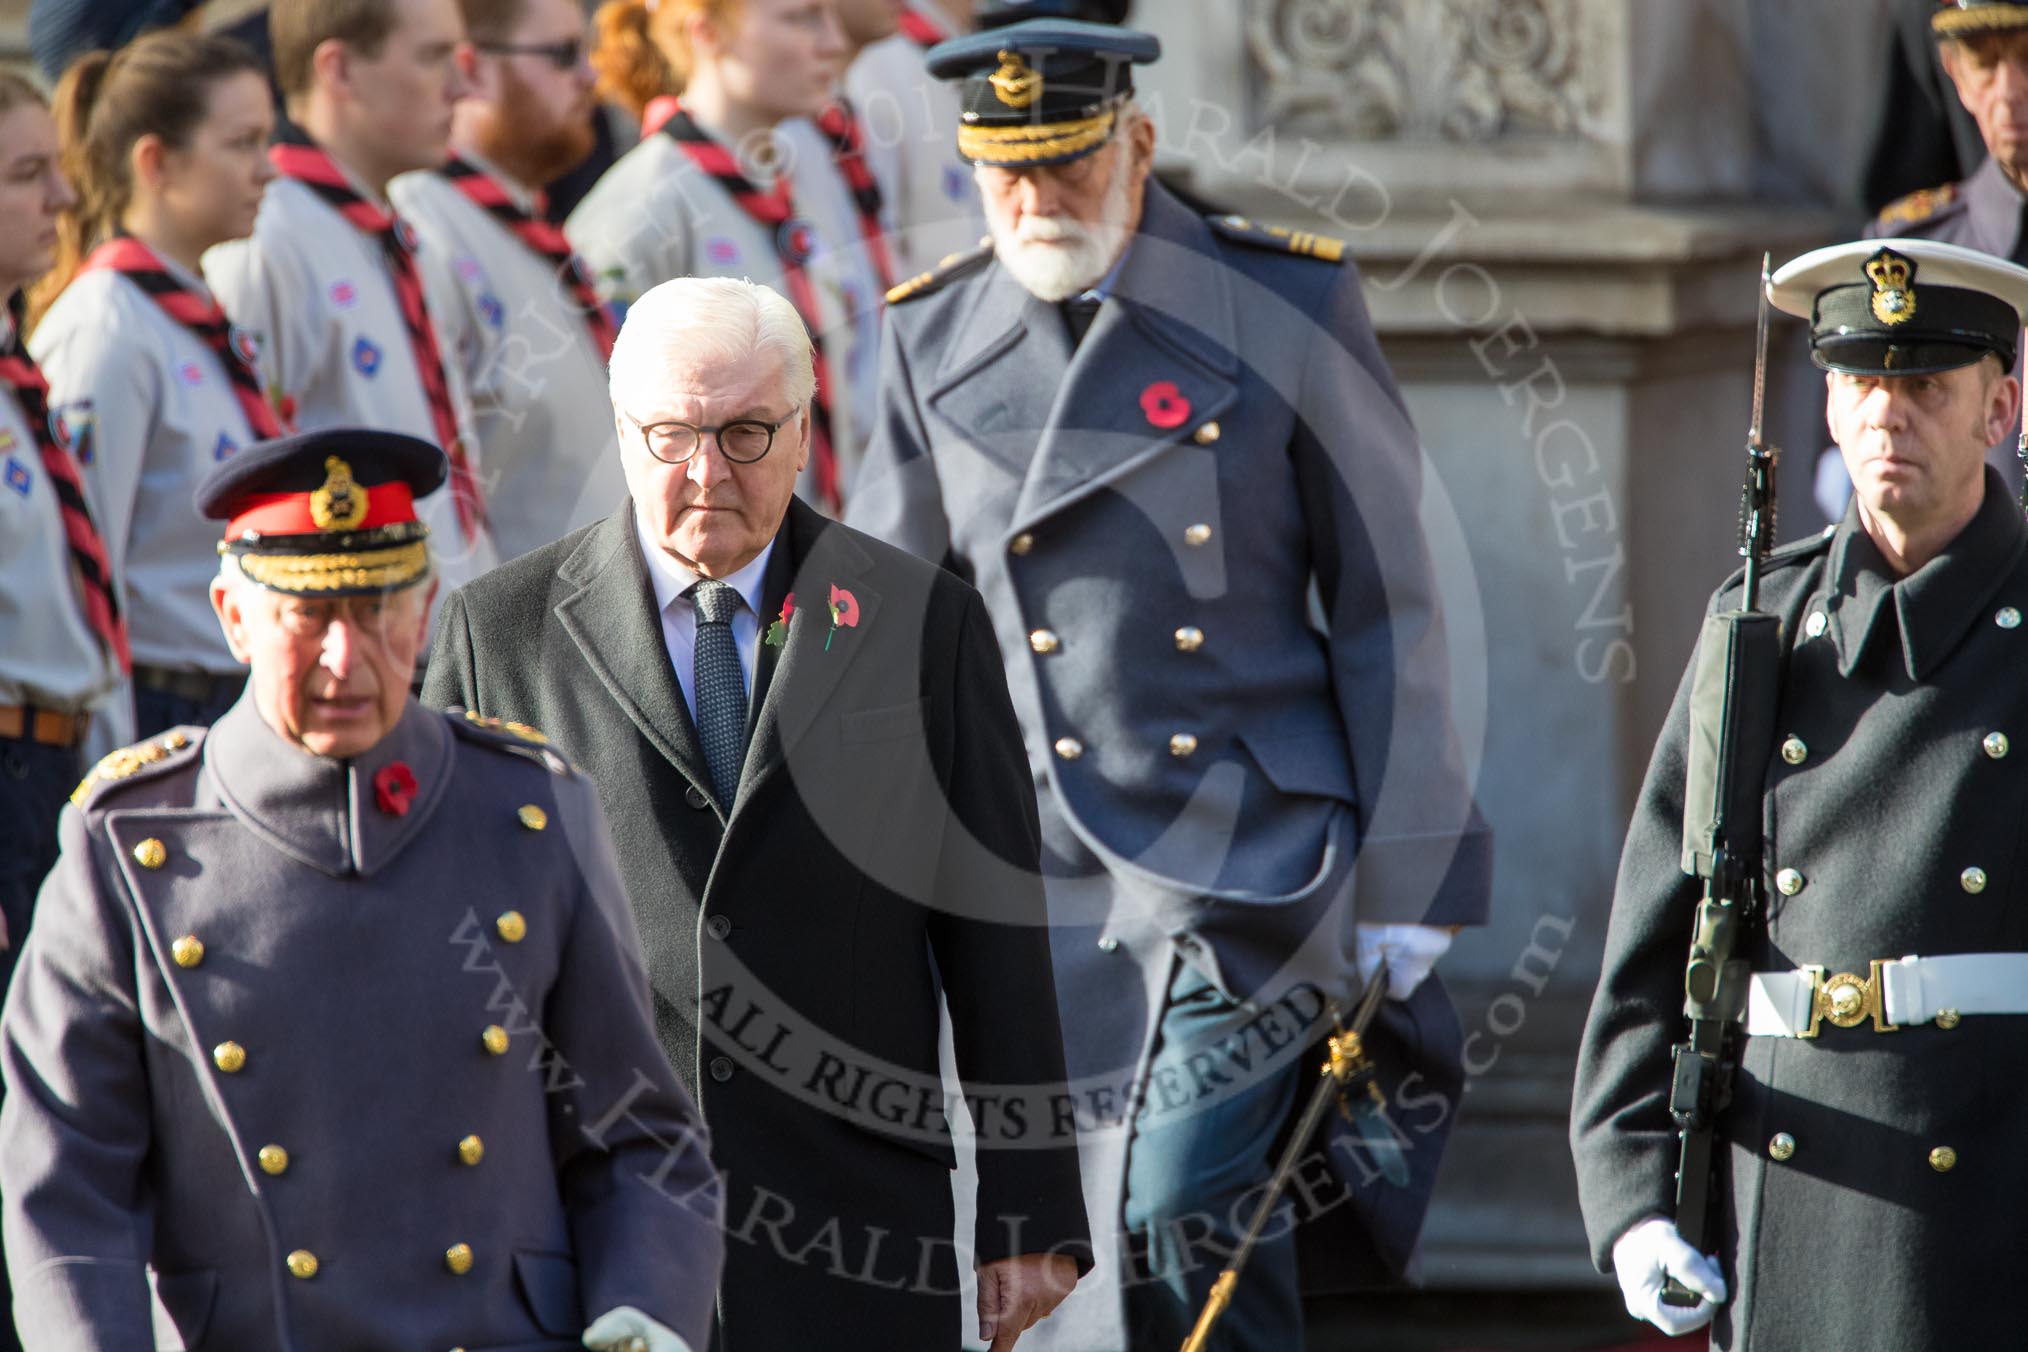 HE The President of the Federal Republic of Germany, Frank-Walter Steinmeier, in focus, between HRH The Prince of Wales (Prince Charles) and HRH The Duke of Kent (Prince Edward) during the Remembrance Sunday Cenotaph Ceremony 2018 at Horse Guards Parade, Westminster, London, 11 November 2018, 10:58.